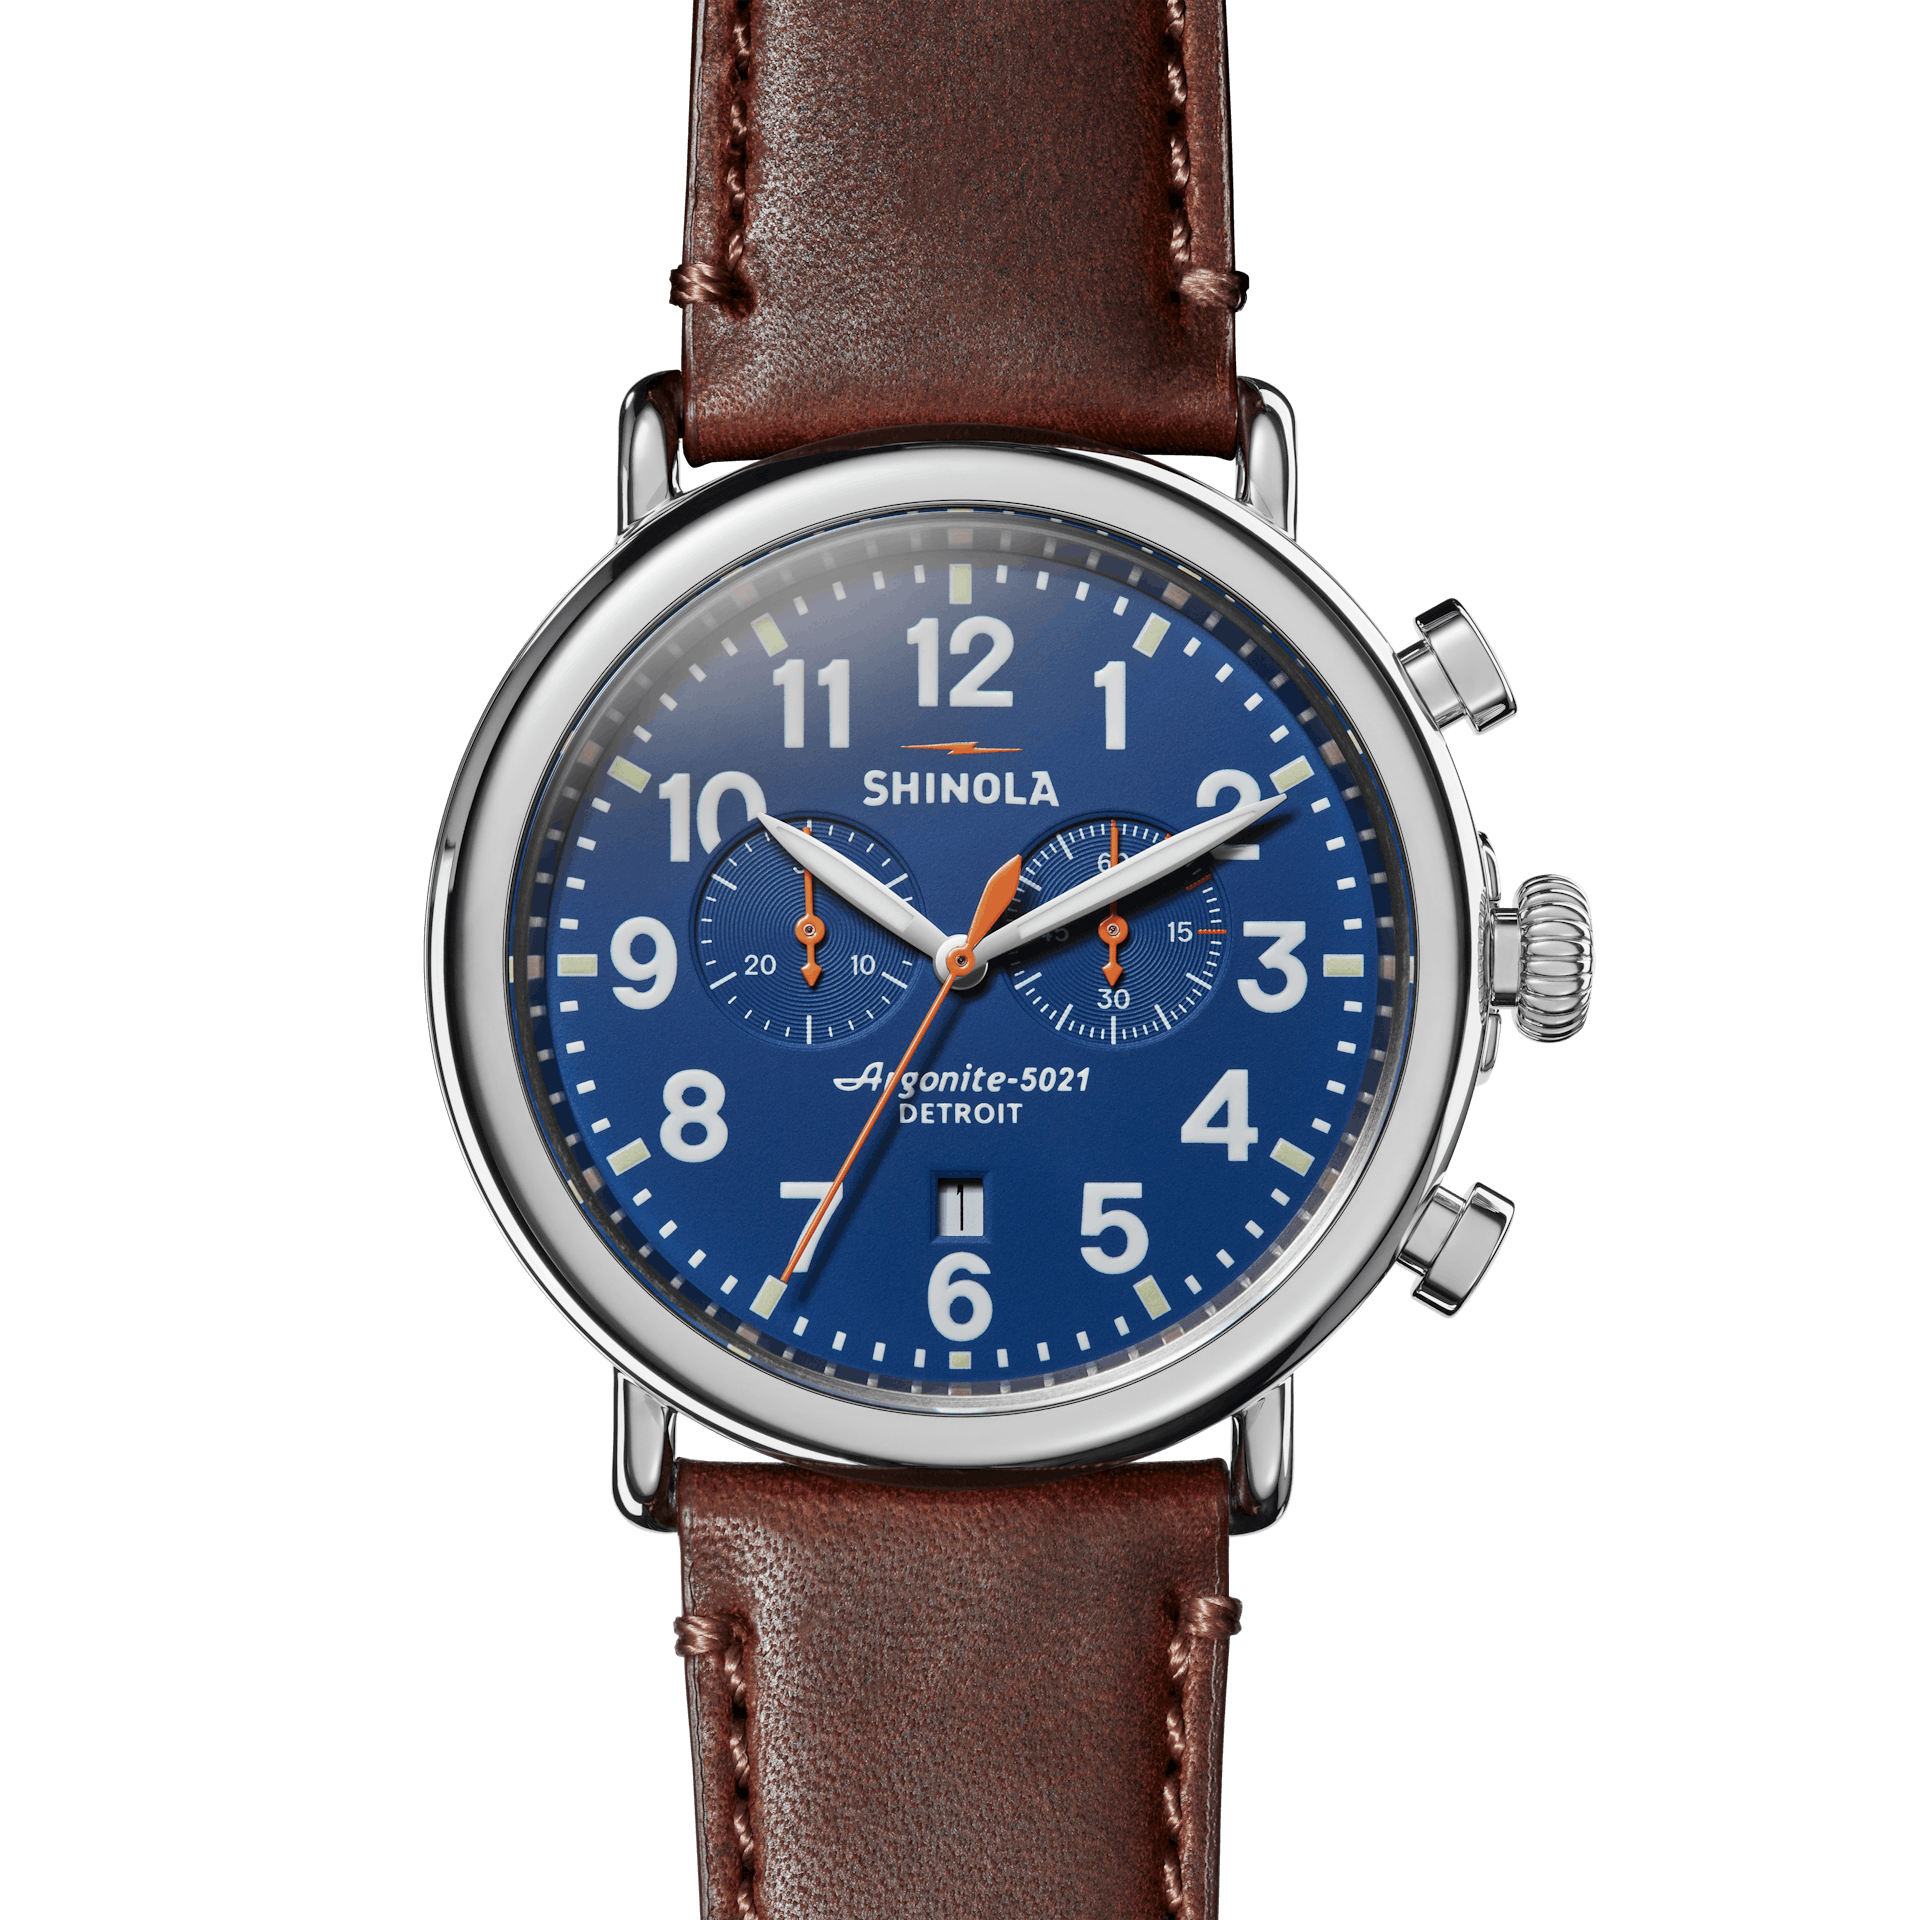 Aggregate 193+ watch brown